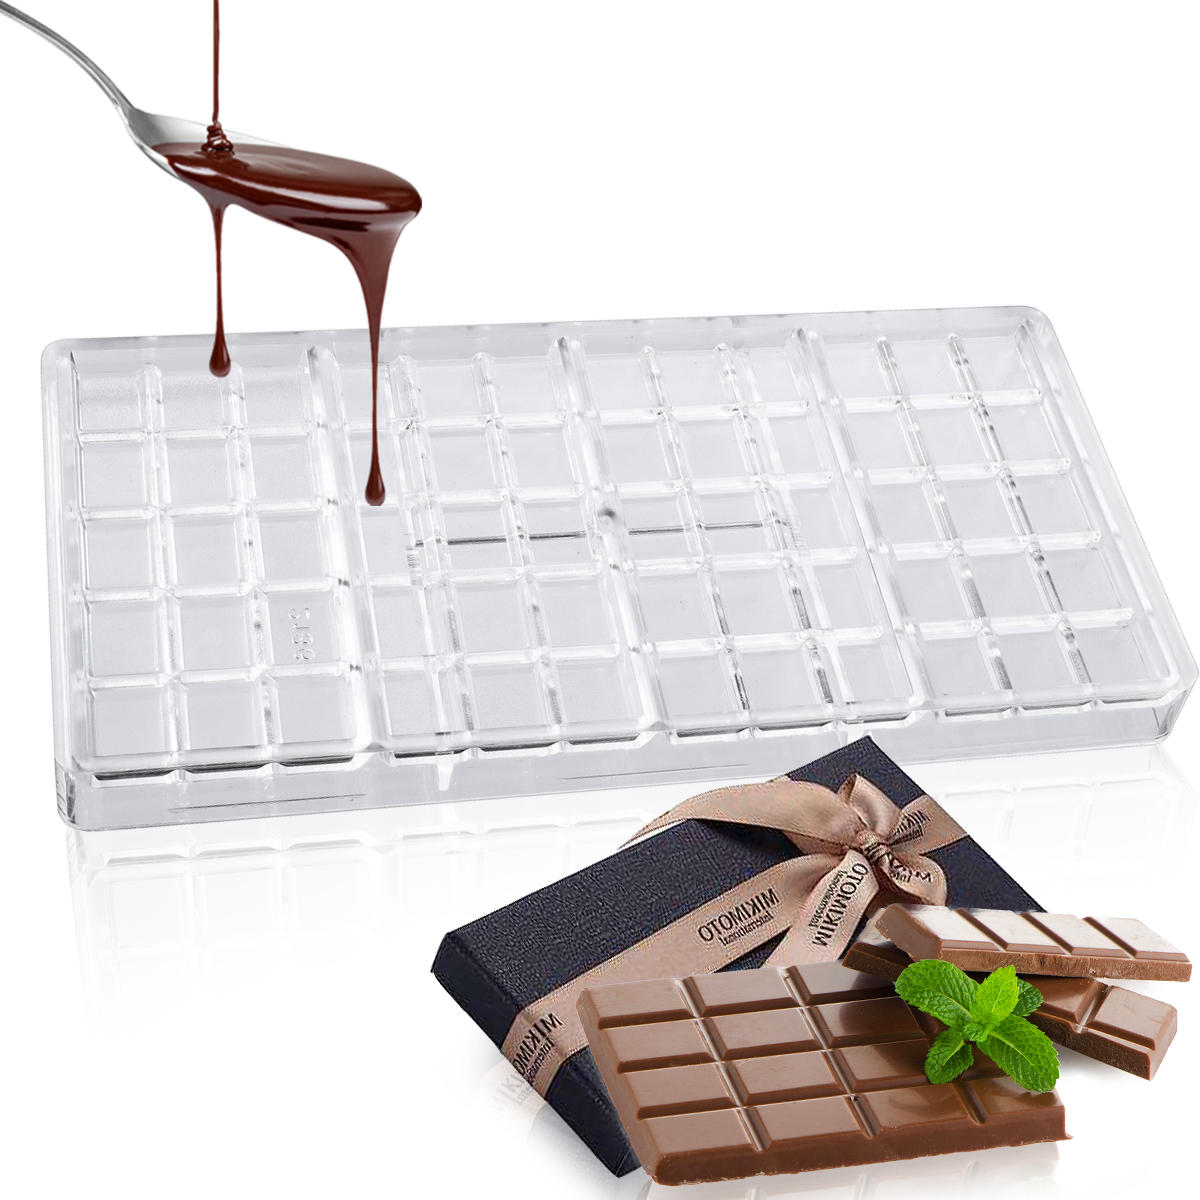 Chocolate Bar Mold Eco-friendly Plastic Baking Pastry Mould Cozinha Kitchen Tool